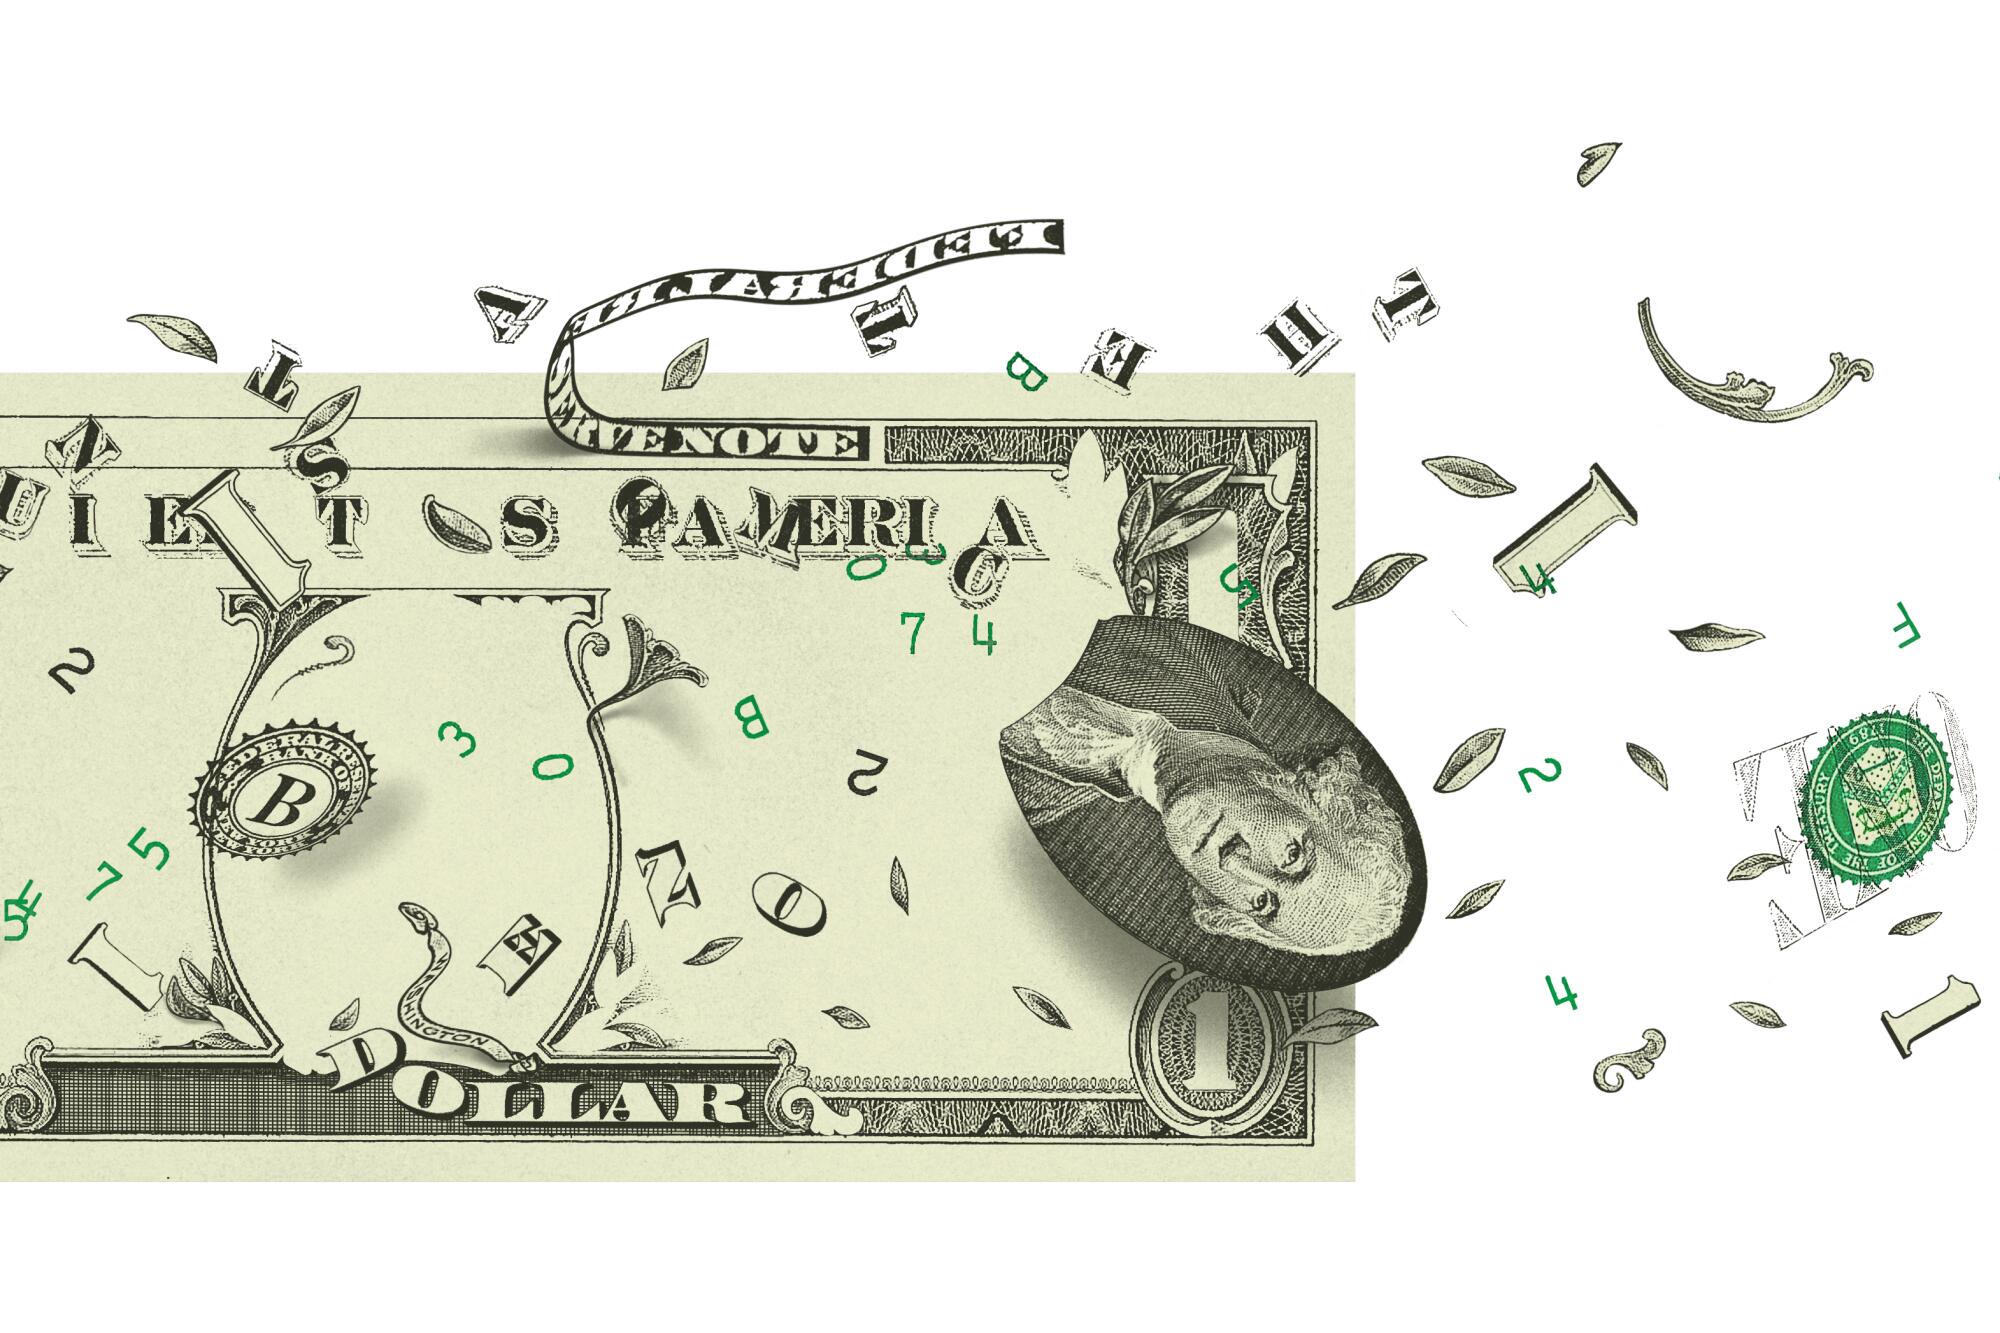 Photo illustration of a one dollar bill with printing flying off from strong winds